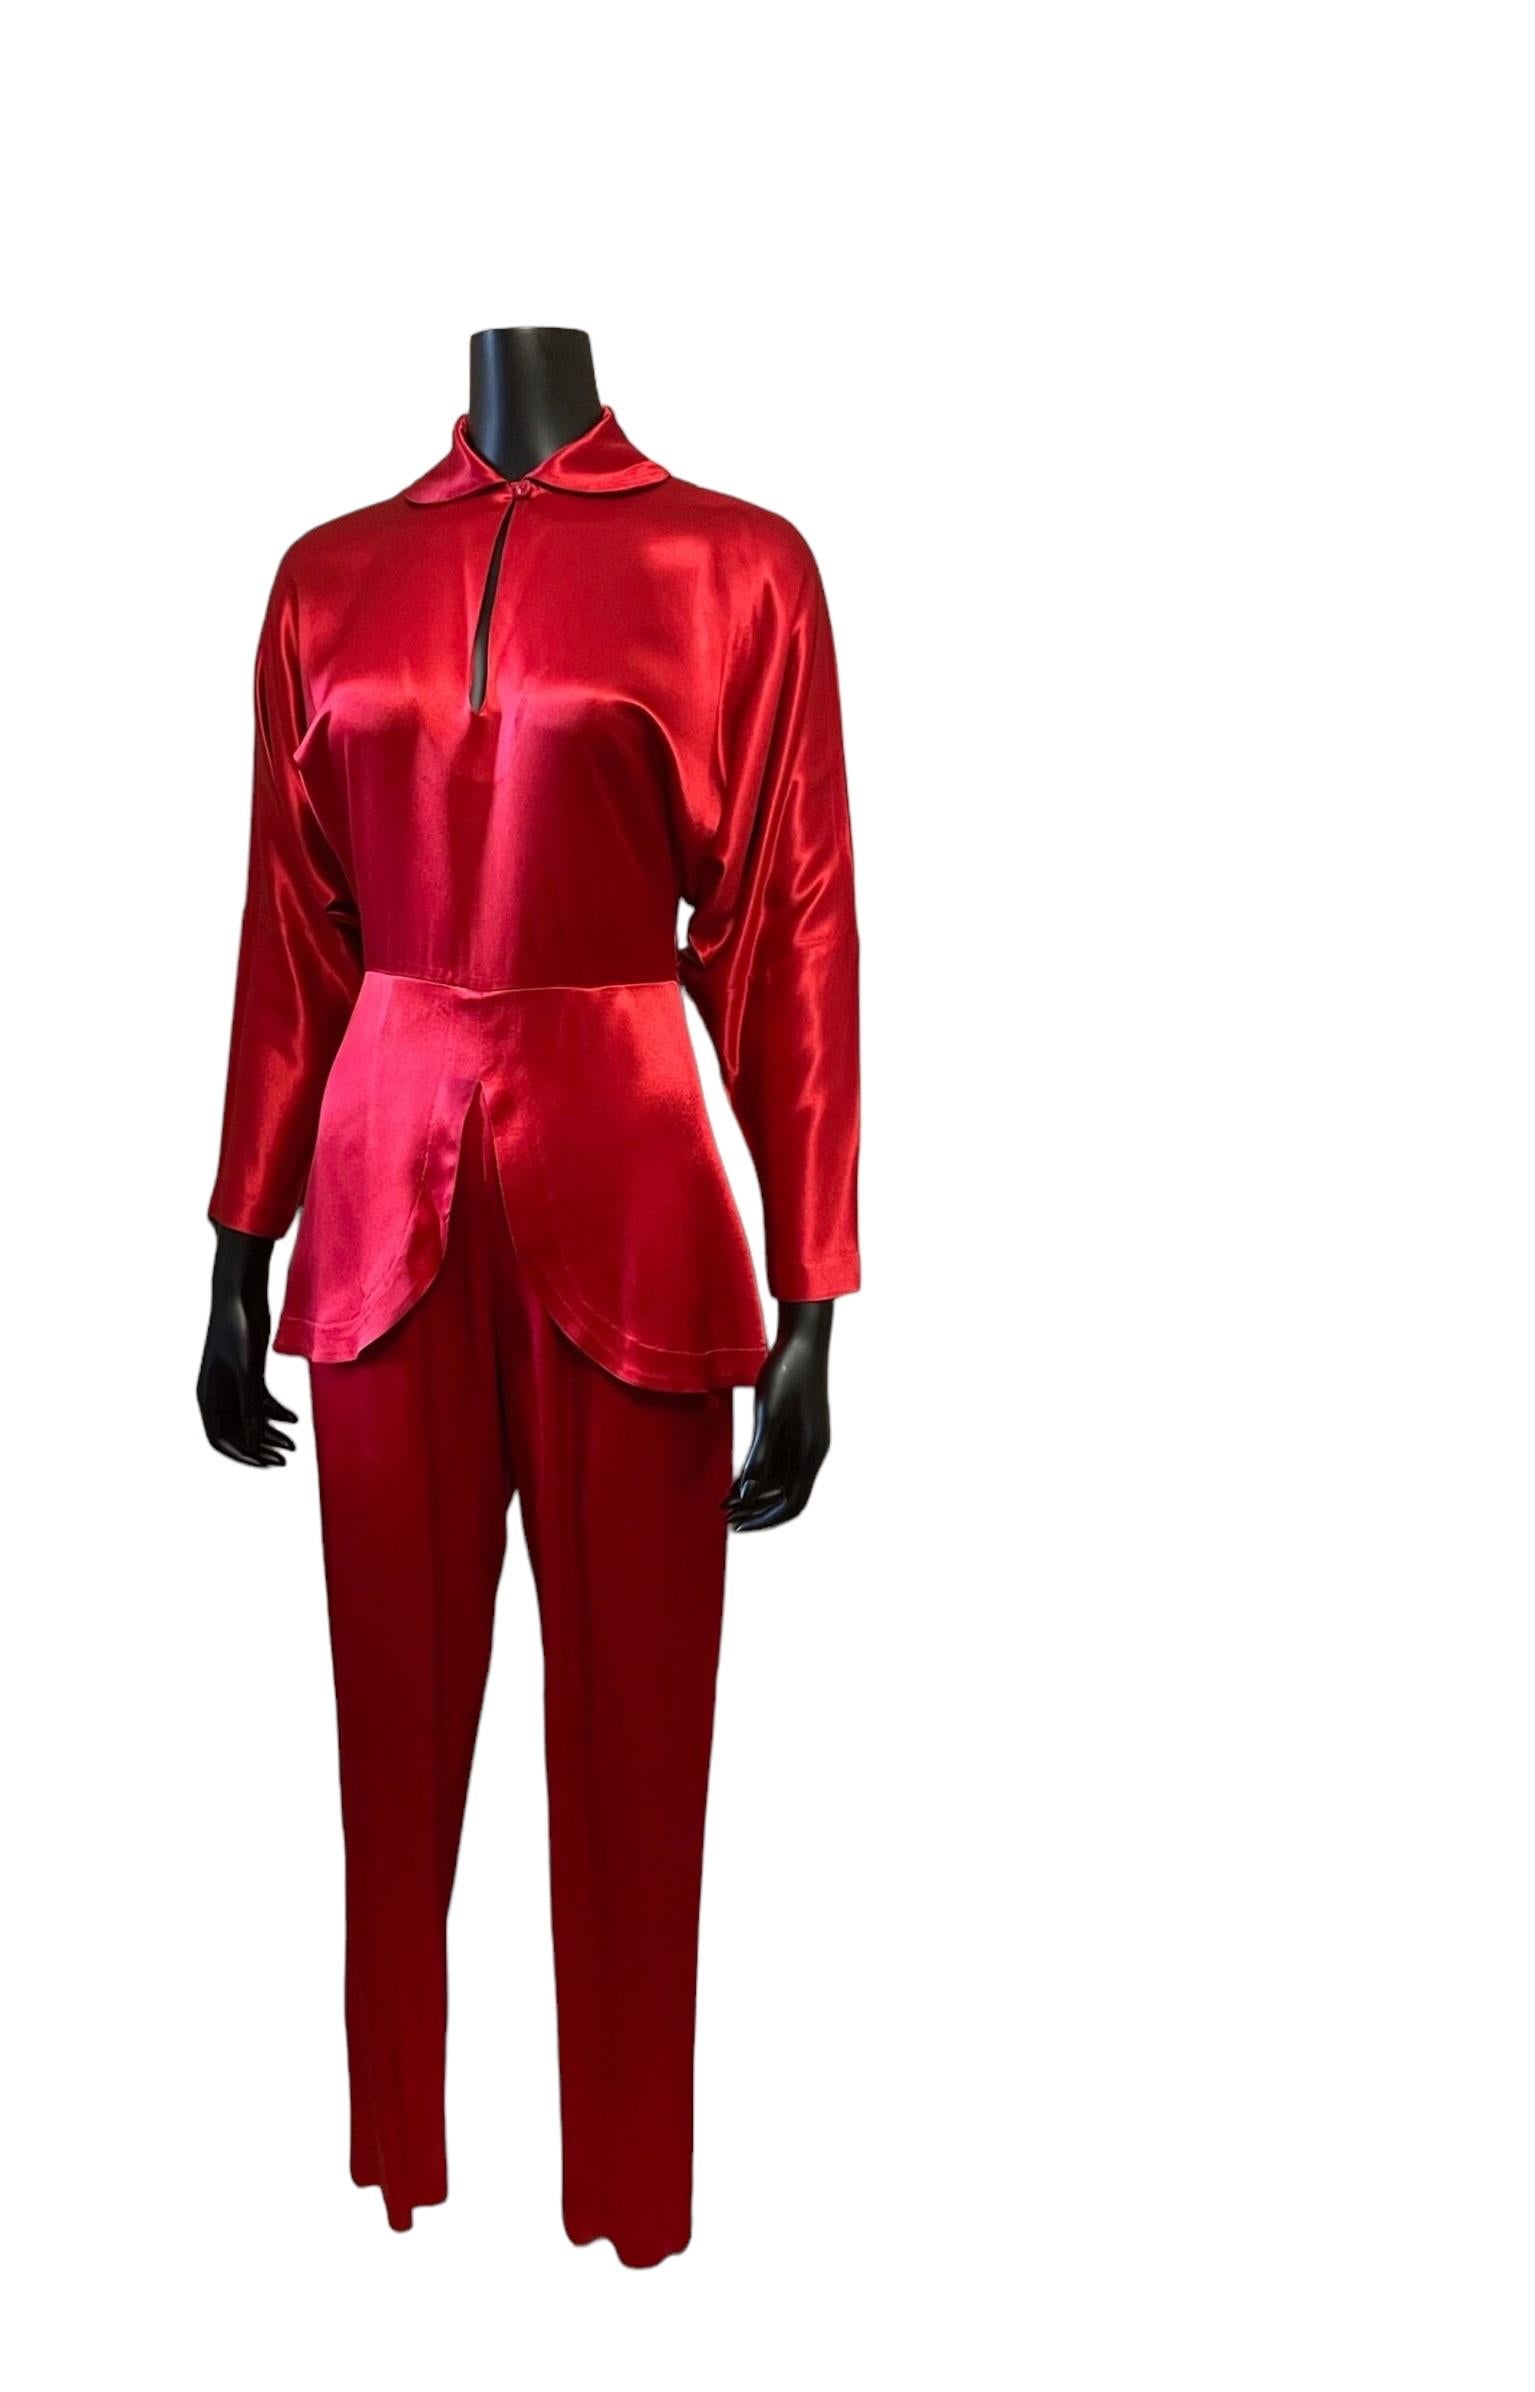 Norma Kamali Lipstick Red Jumpsuit, Circa 1980s For Sale 2